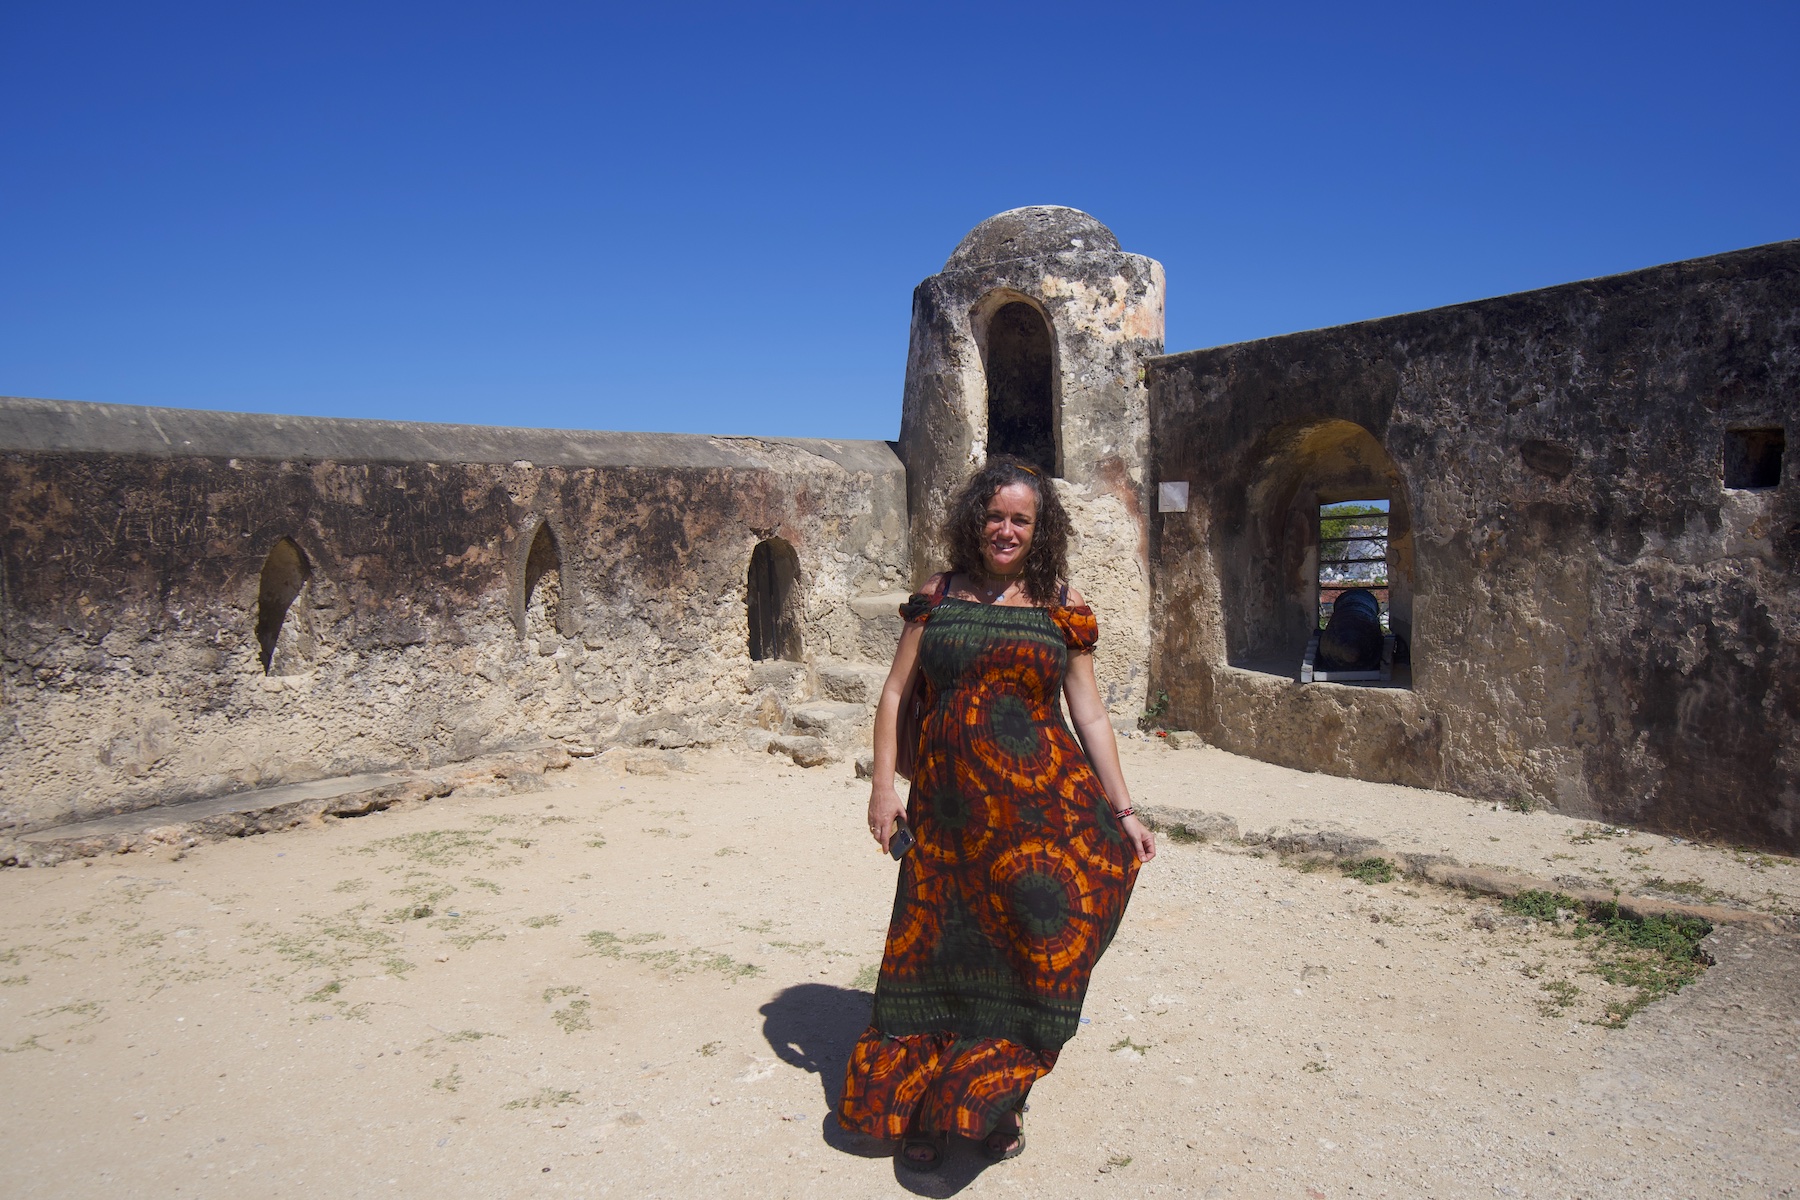 Pilar at one of the Fort Jesus towers